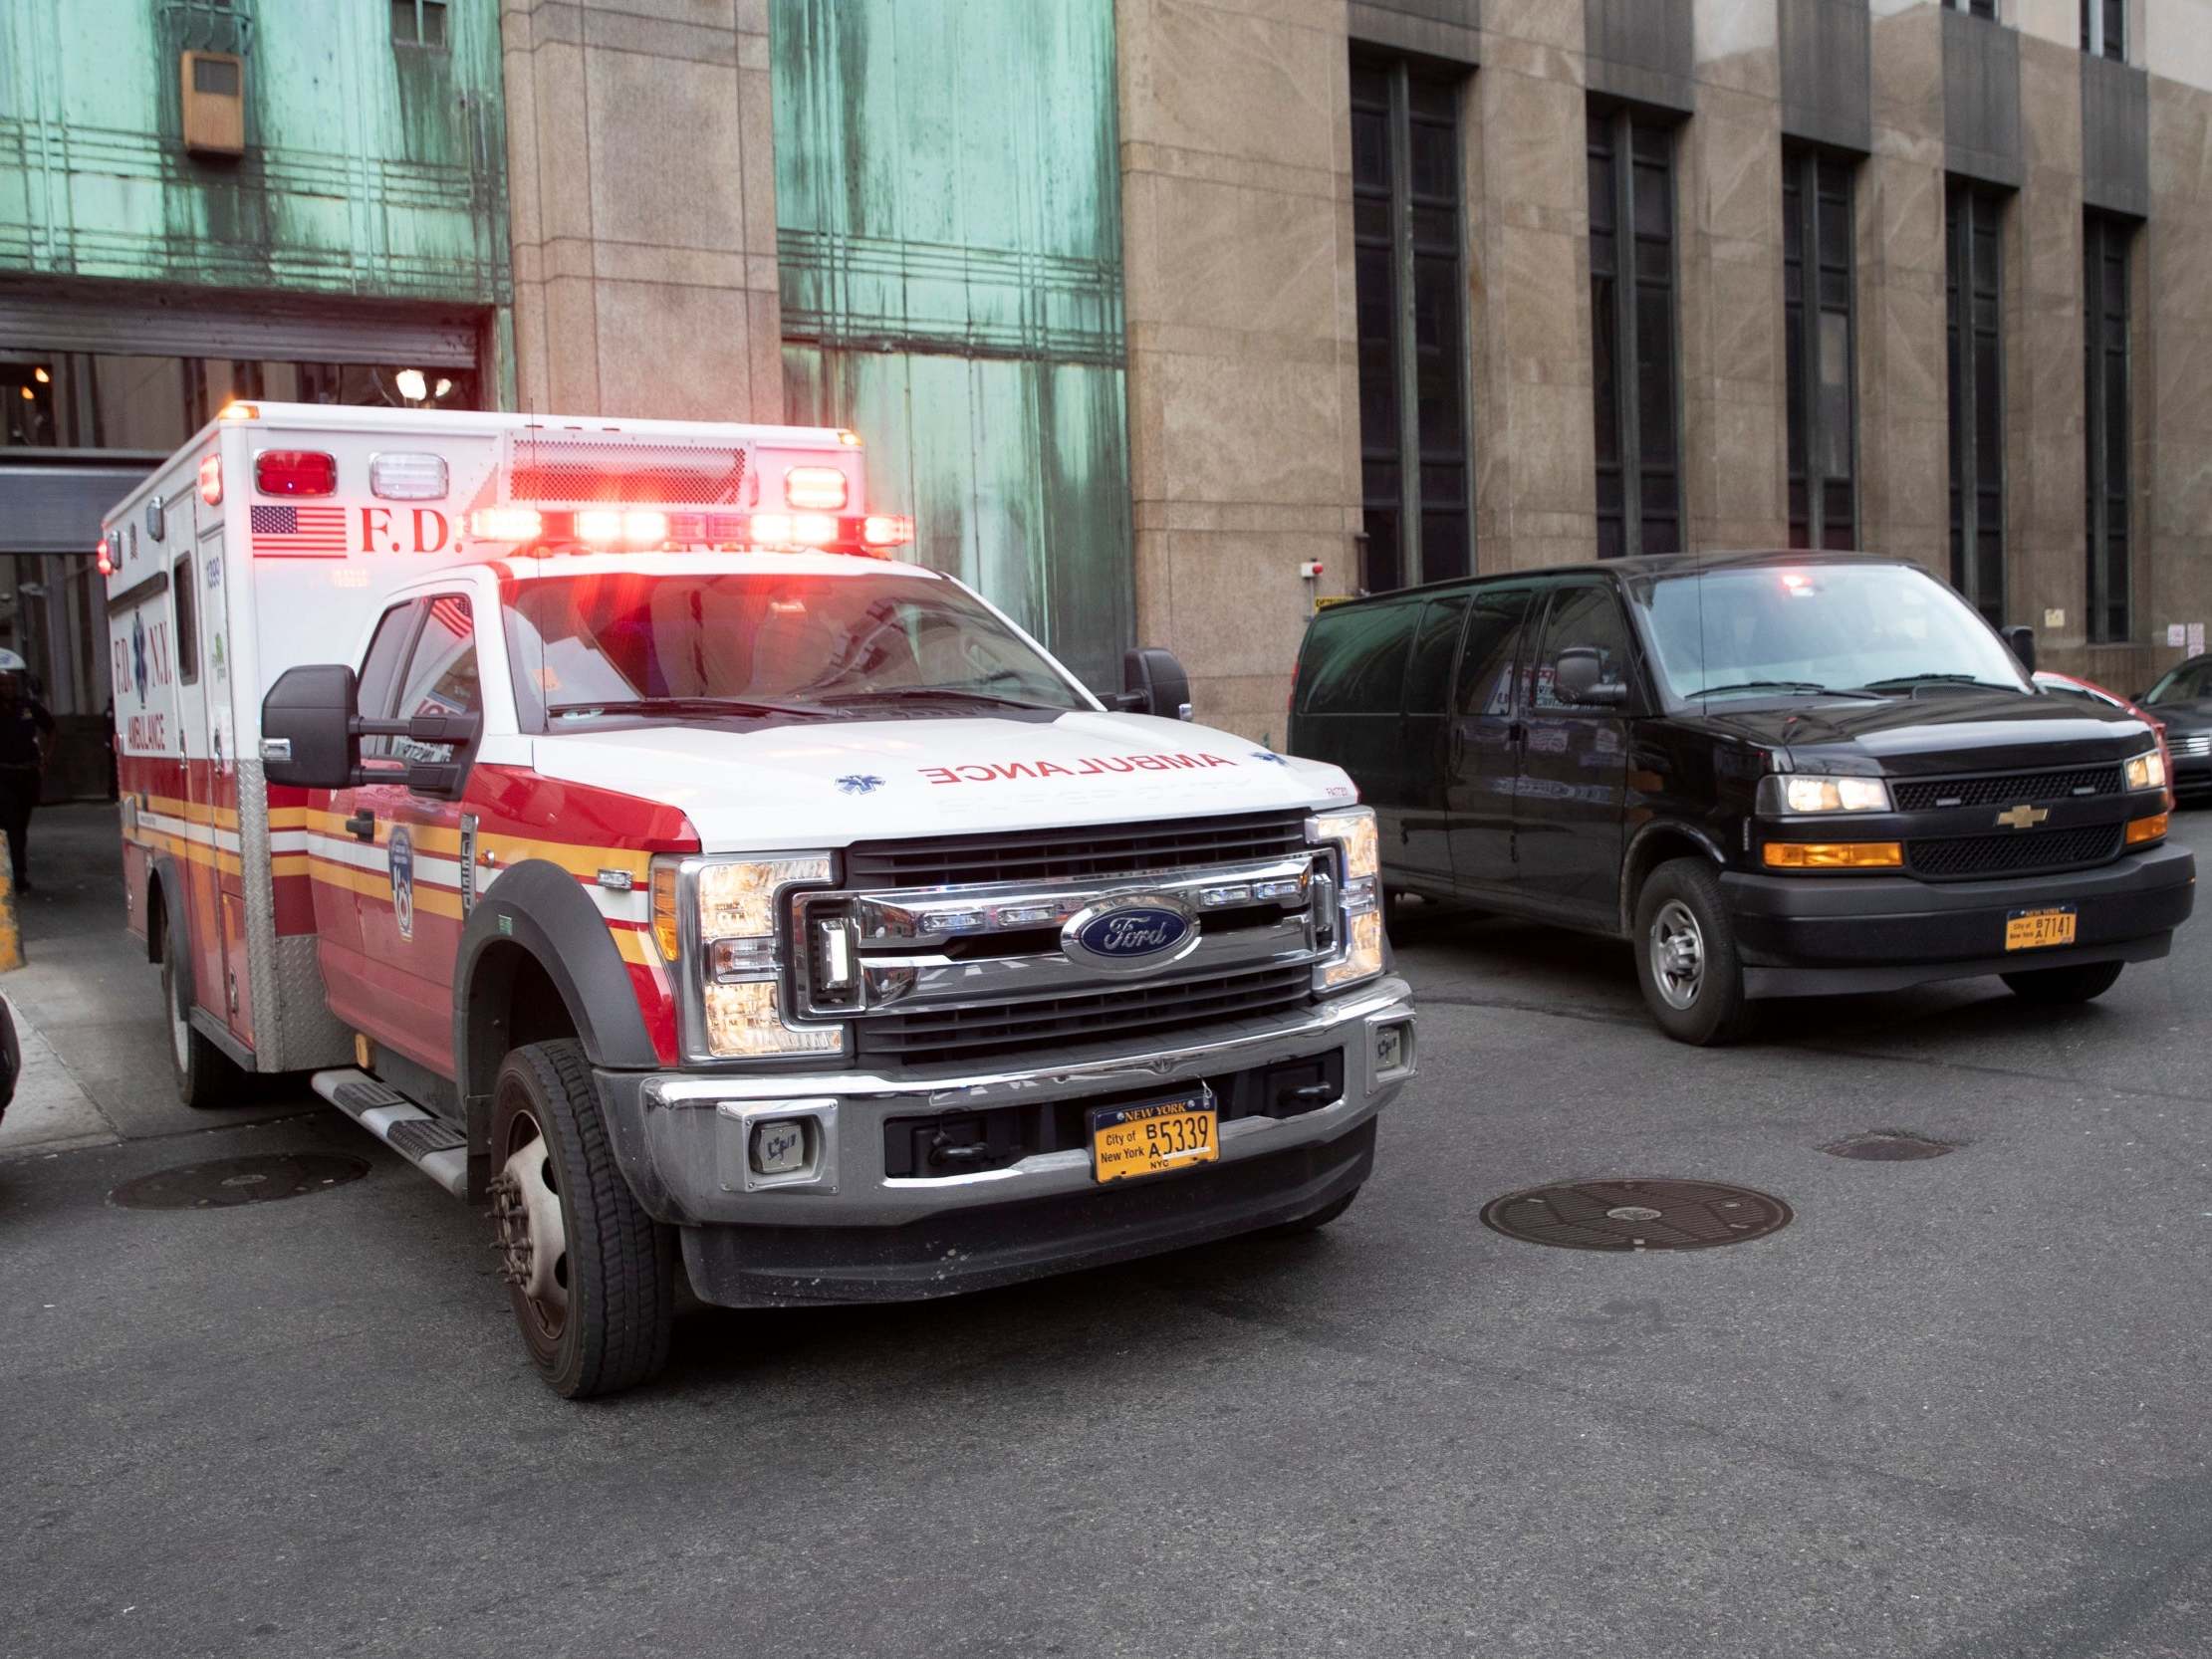 An ambulance carrying Harvey Weinstein is escorted from a courthouse in Manhattan, New York